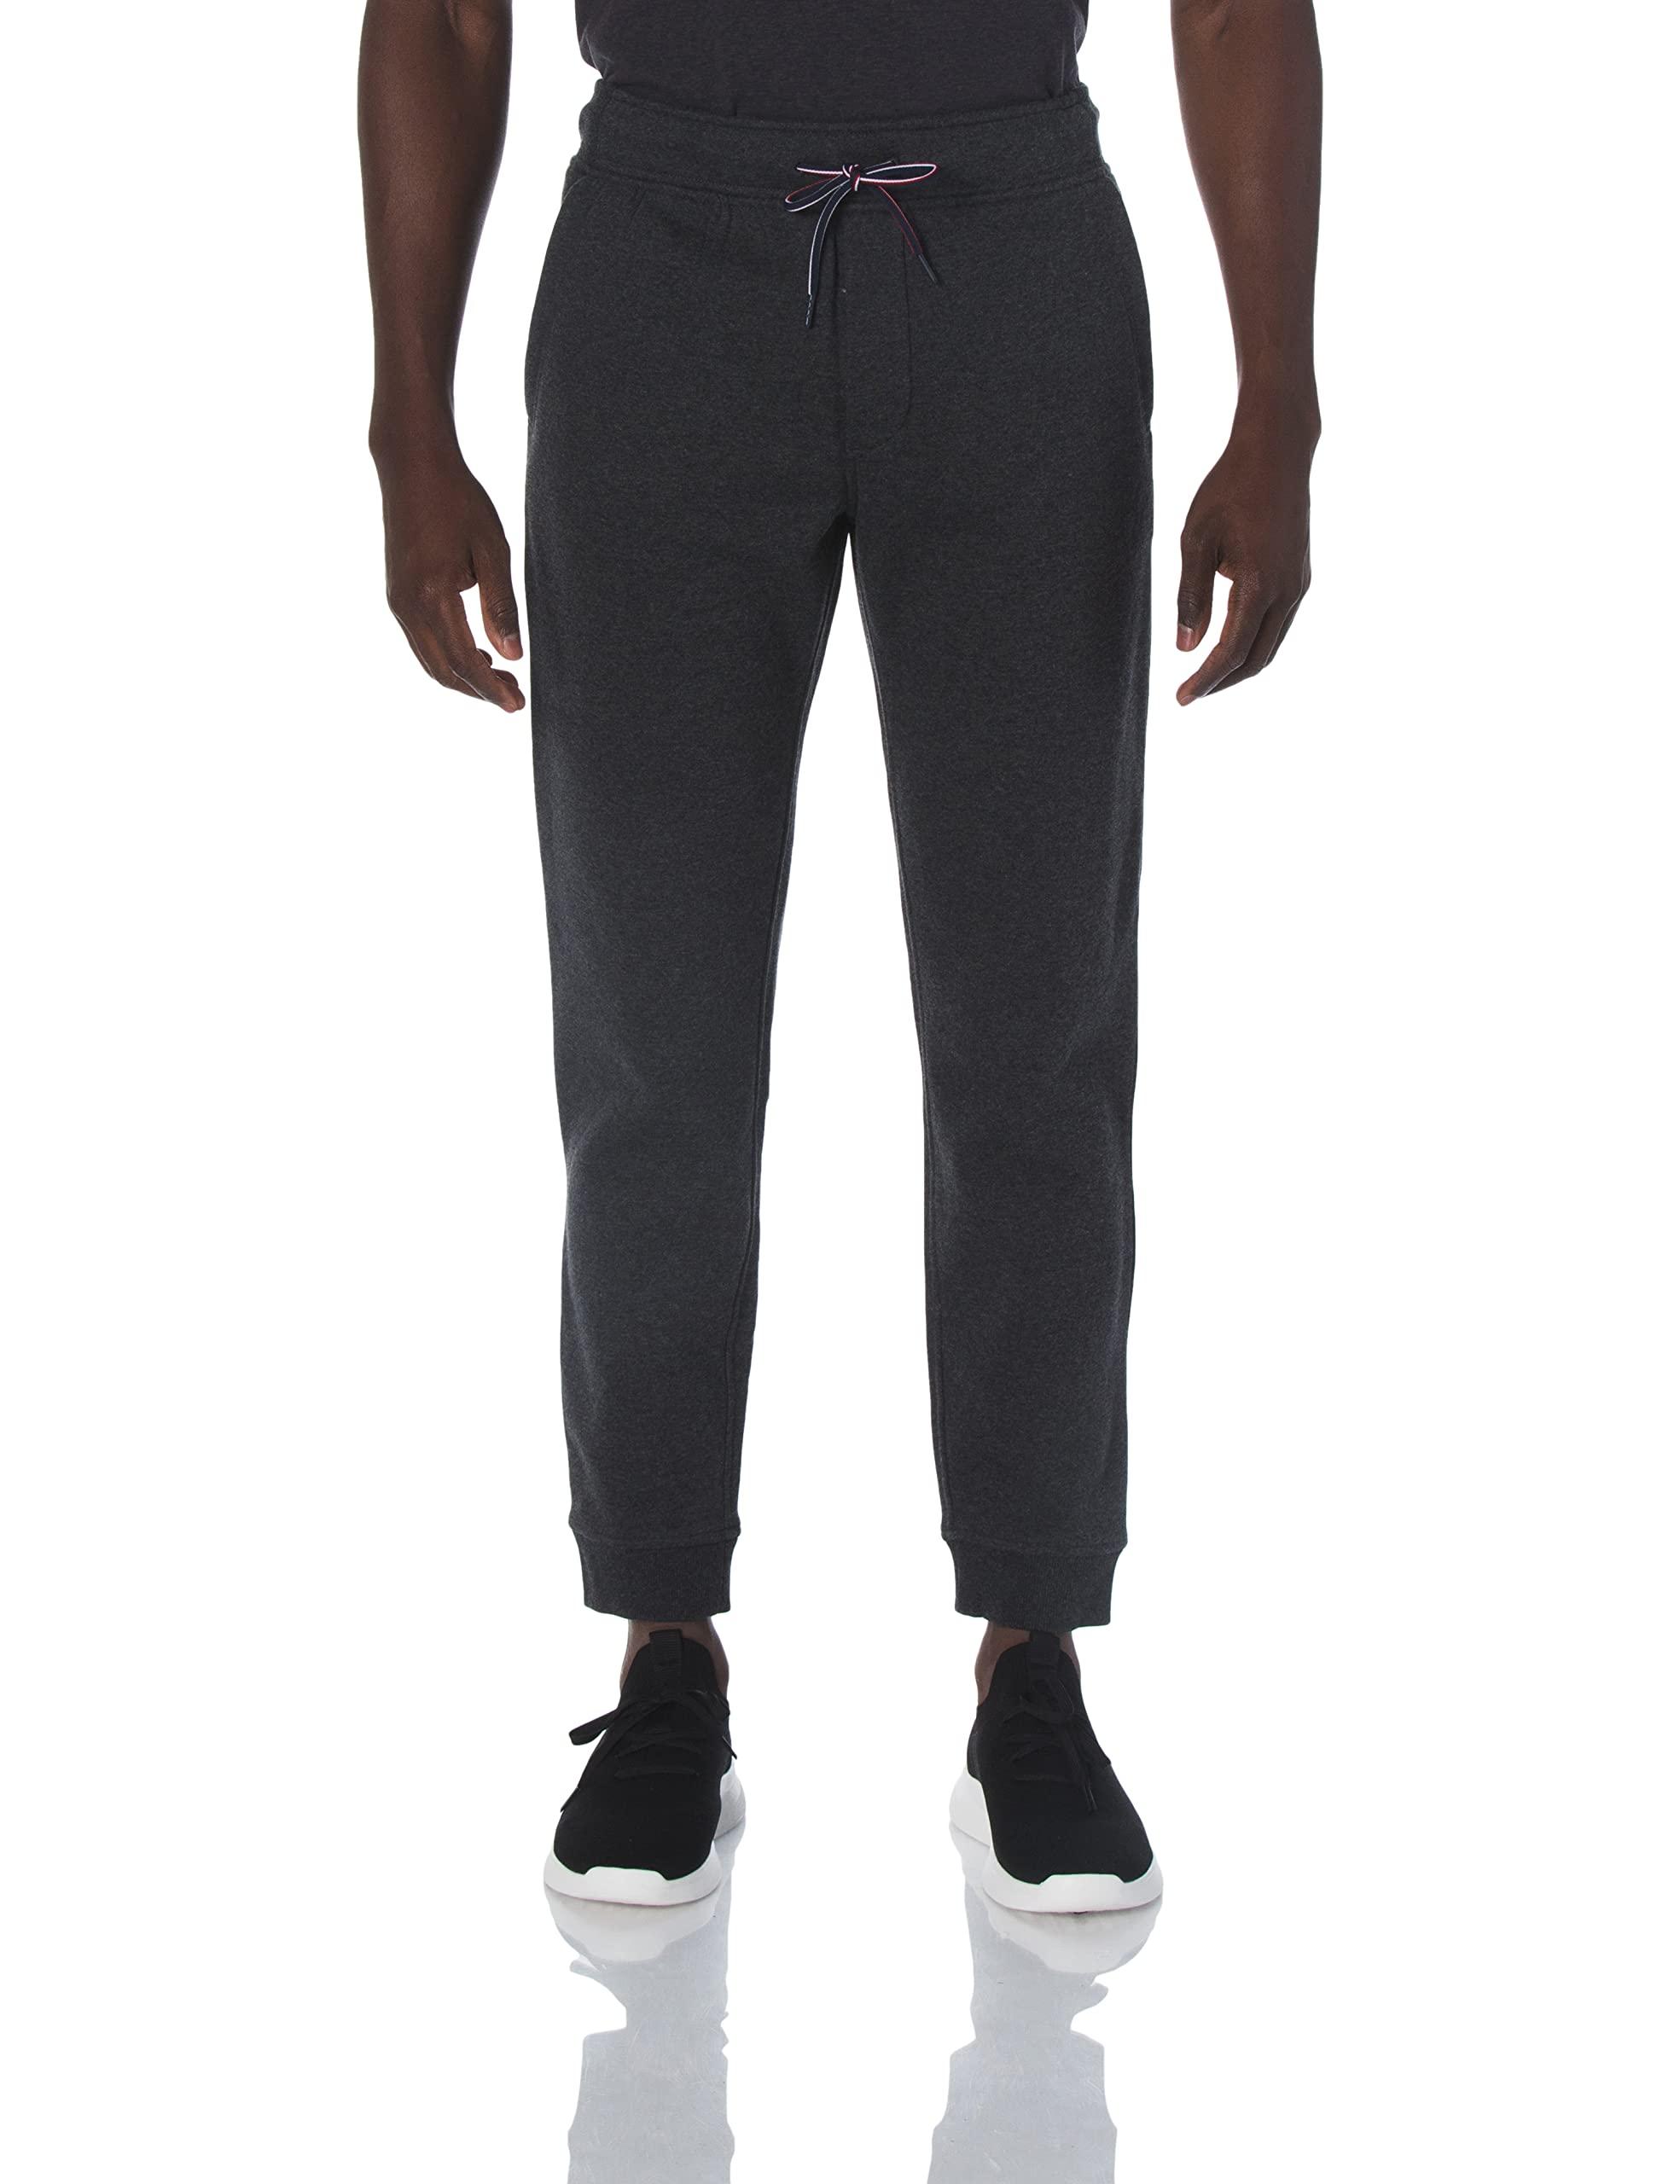 Tommy Hilfiger Sweatpants in Charcoal Grey (Gray) for Men - Save 28% - Lyst